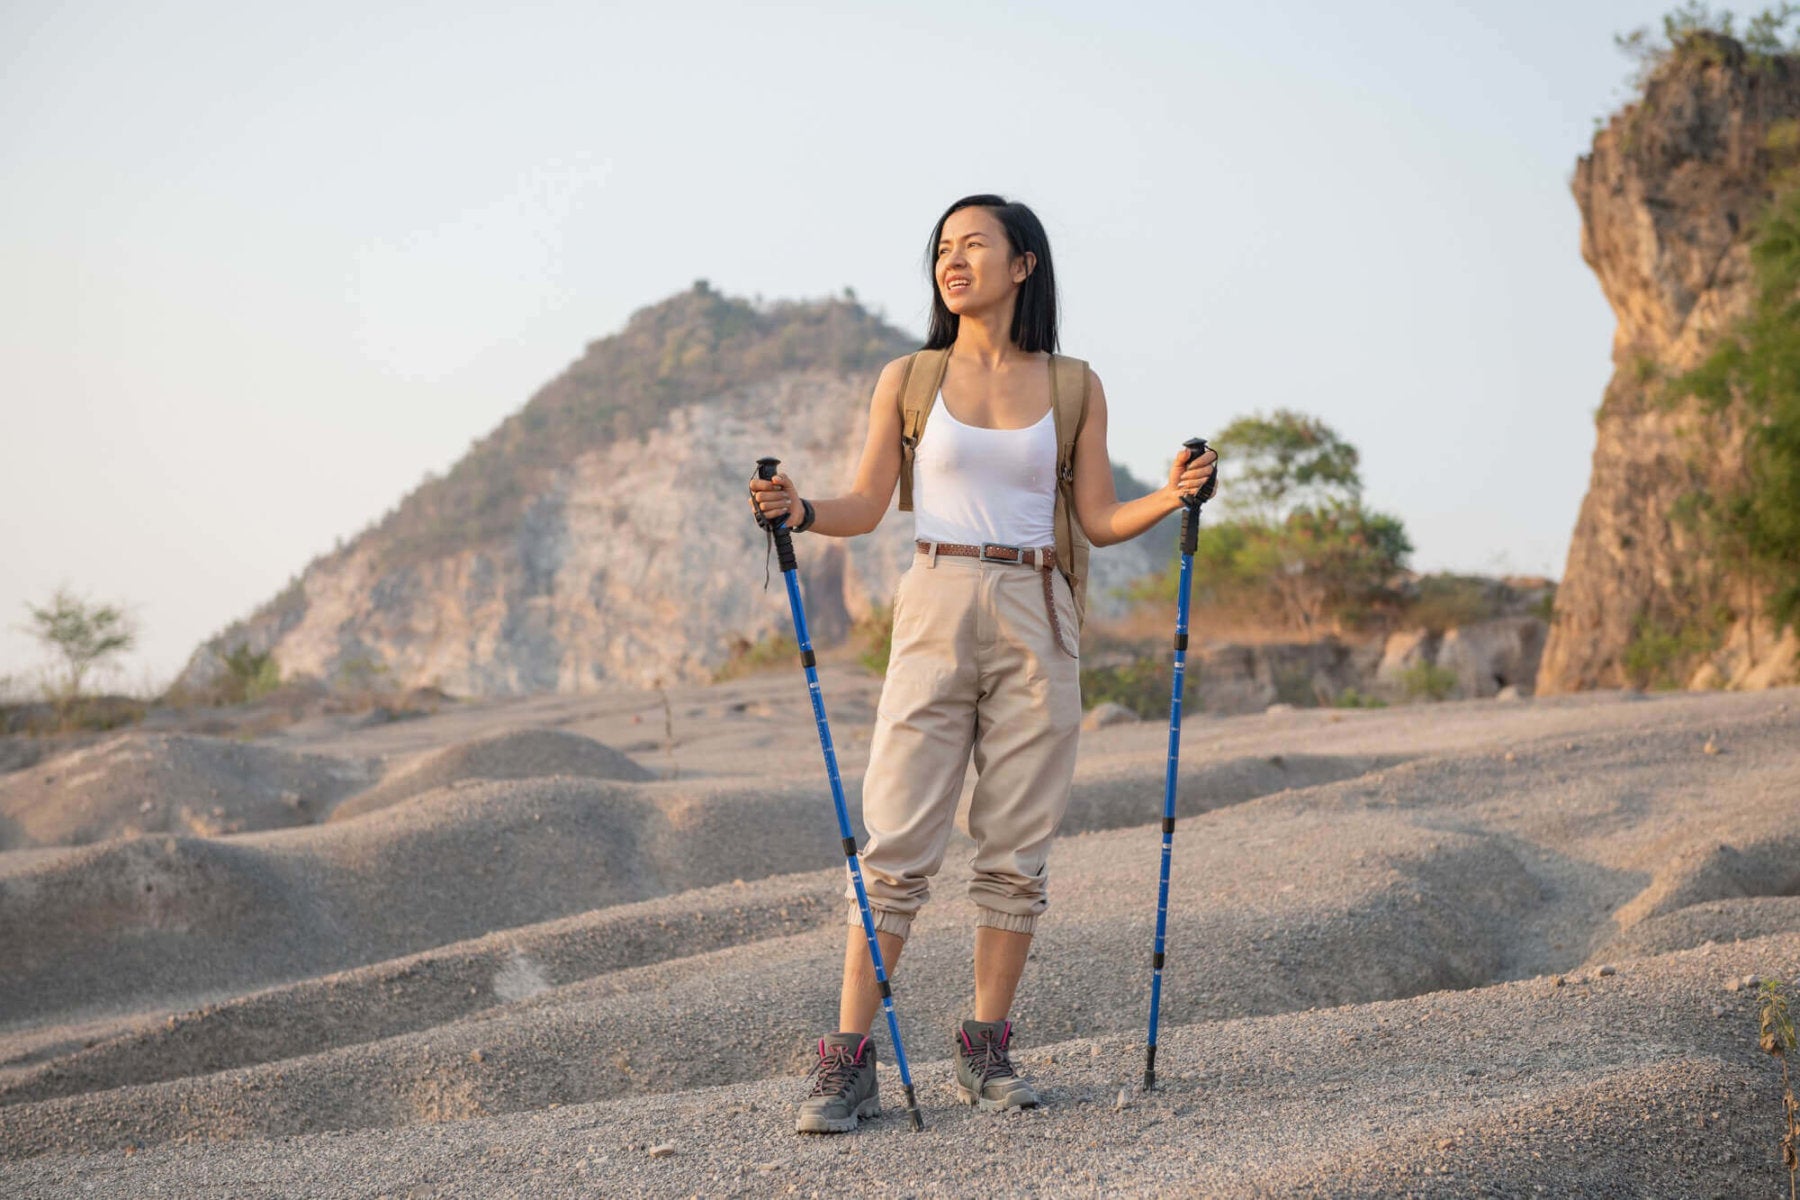 The HEALTH BENEFITS OF USING HIKING POLES